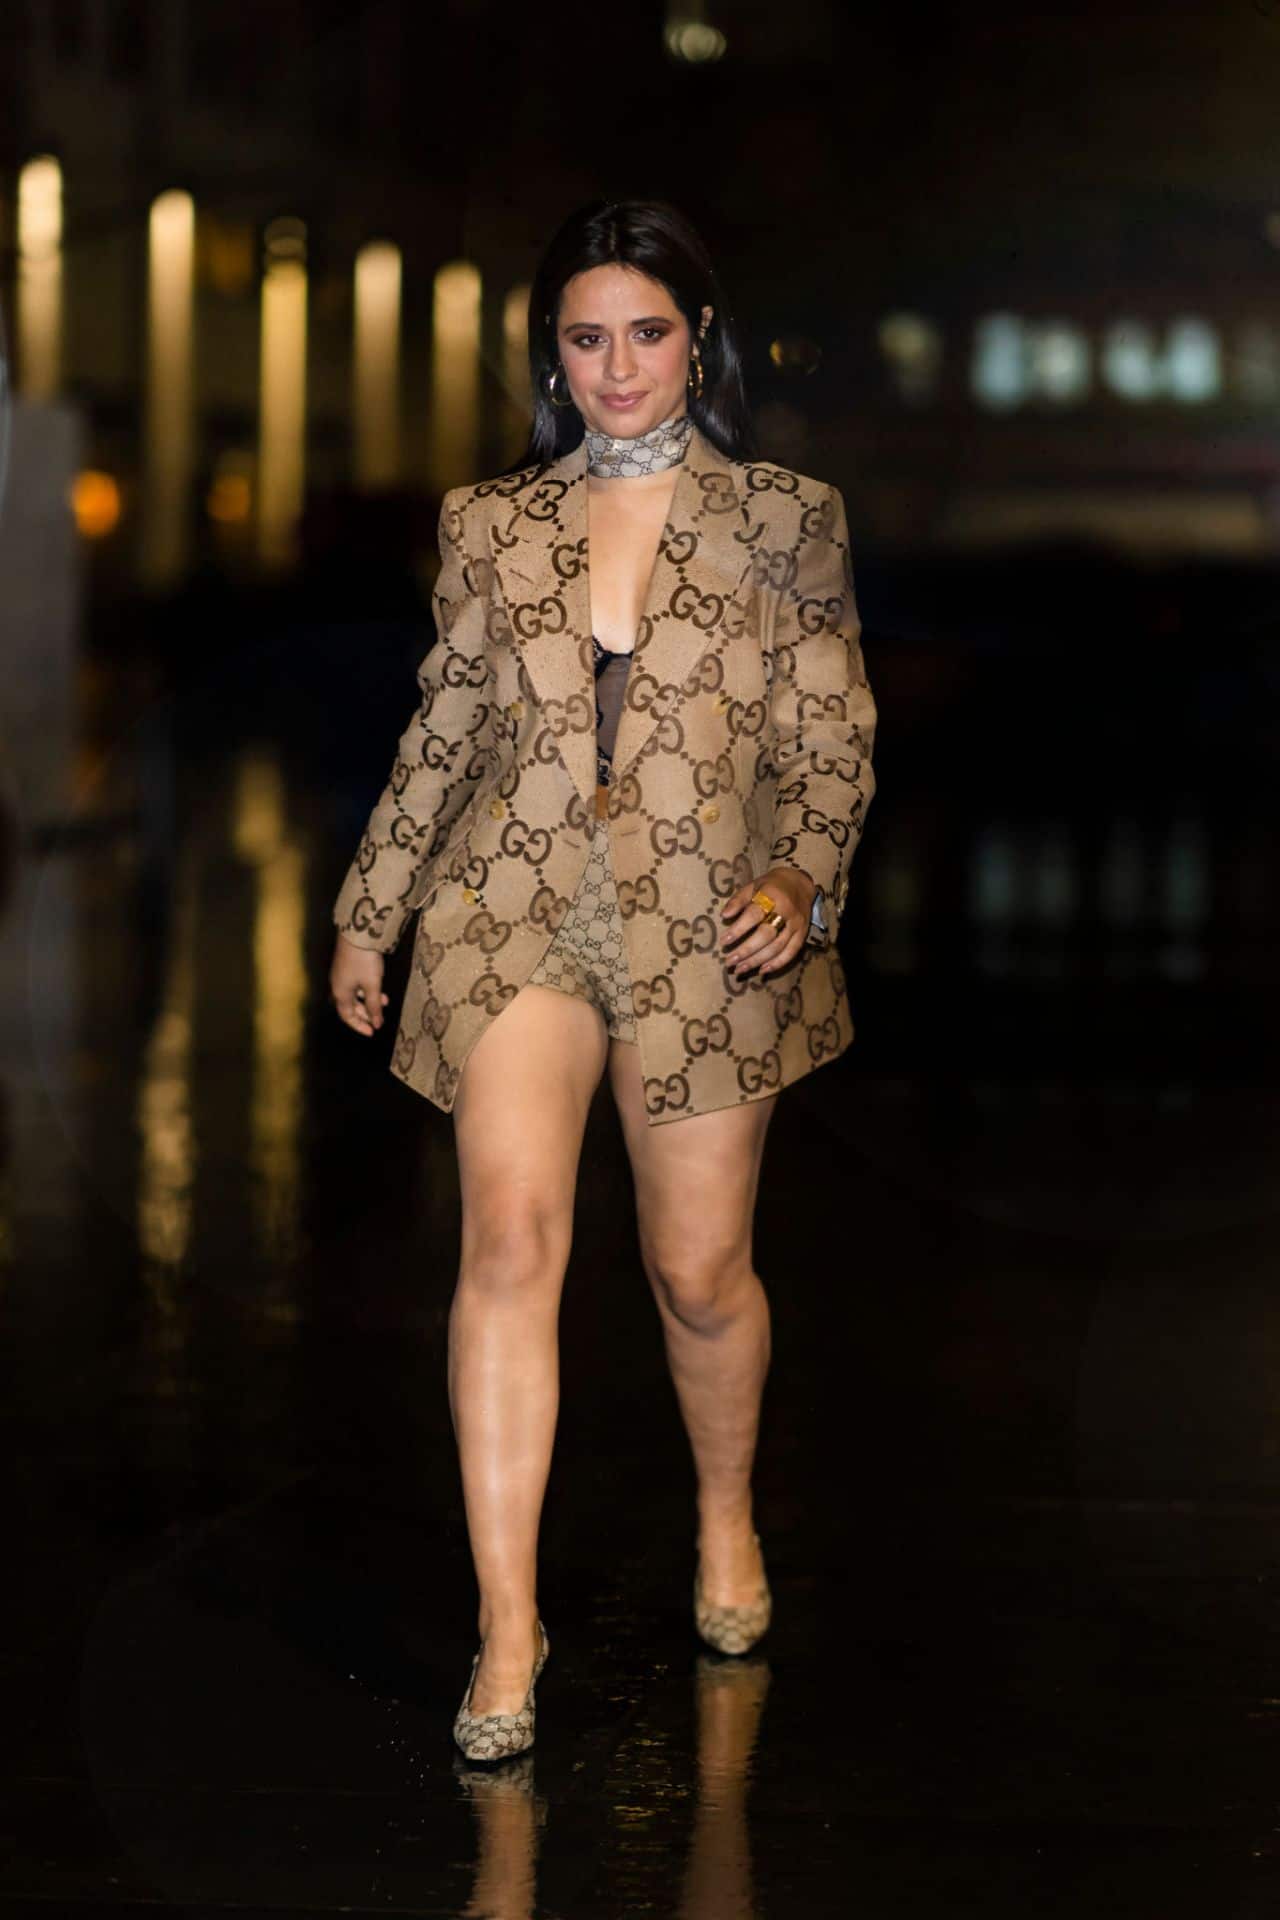 Camila Cabello Oozes Elegance in Seductive Gucci Hot Pants and Blazer in NY